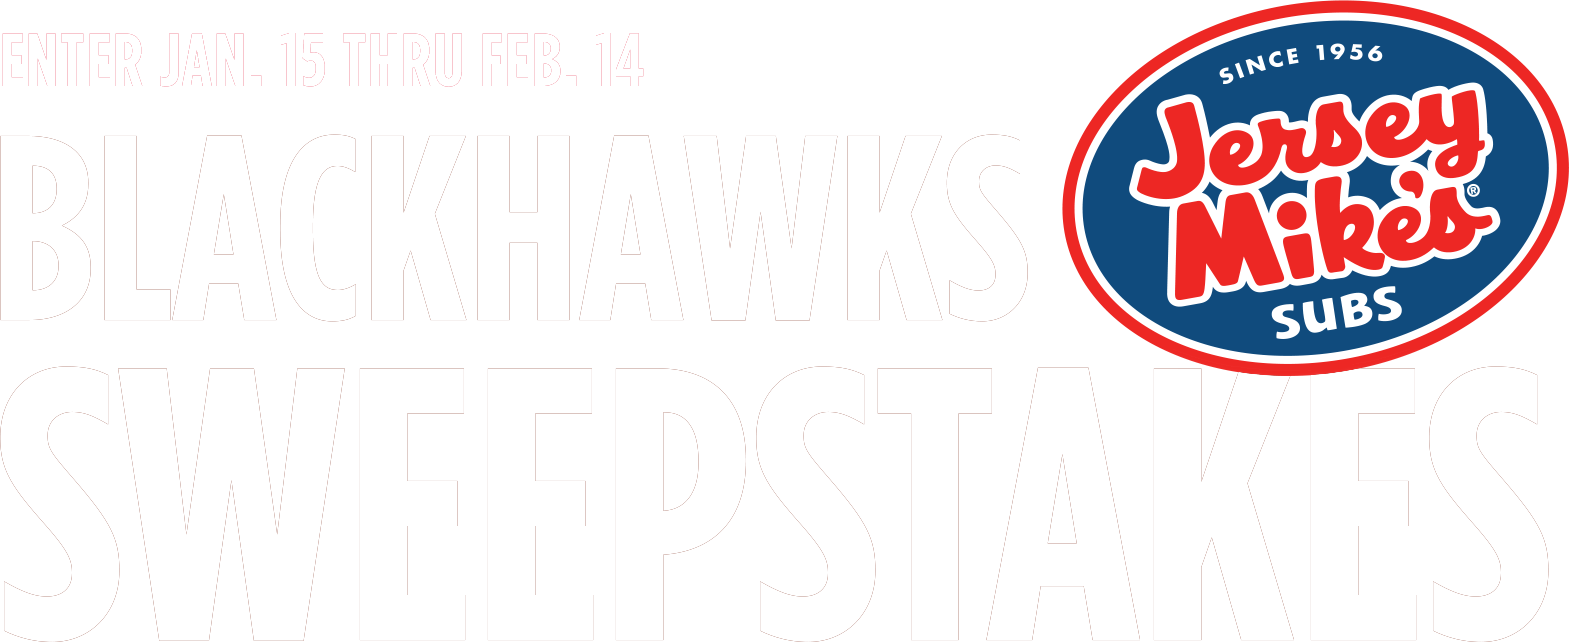 31 Days Of Blackhawks Jerseys Sweepstakes Jersey Mikes